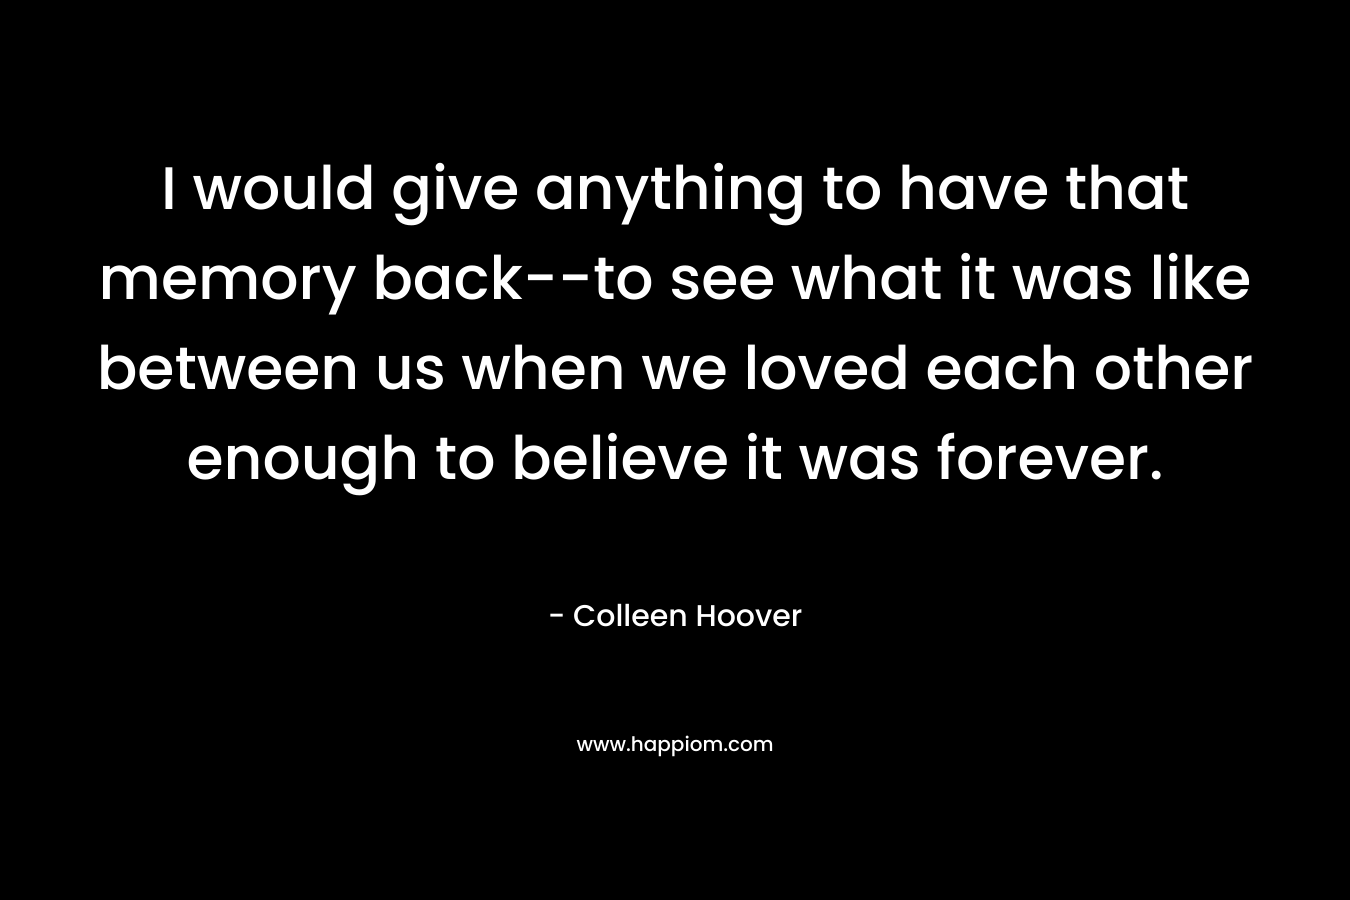 I would give anything to have that memory back--to see what it was like between us when we loved each other enough to believe it was forever.